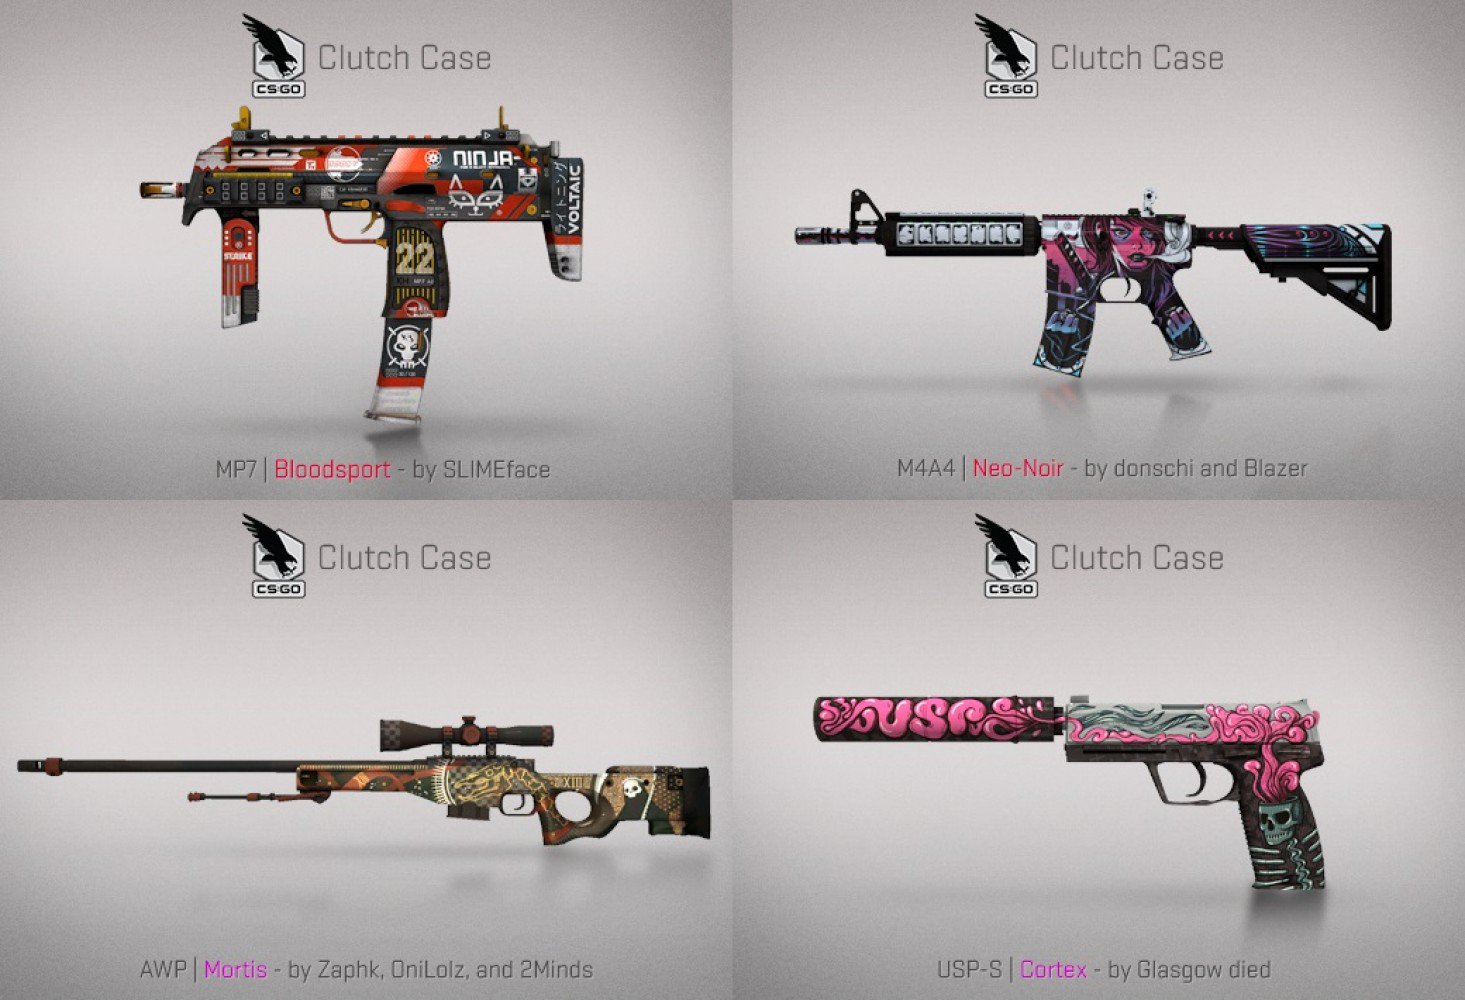 DaddySkins on Twitter: "Which of these from the new clutch case would you want in your inventory?! COMMENT! PICK ONE! https://t.co/ZsJBo0KgXI" / Twitter